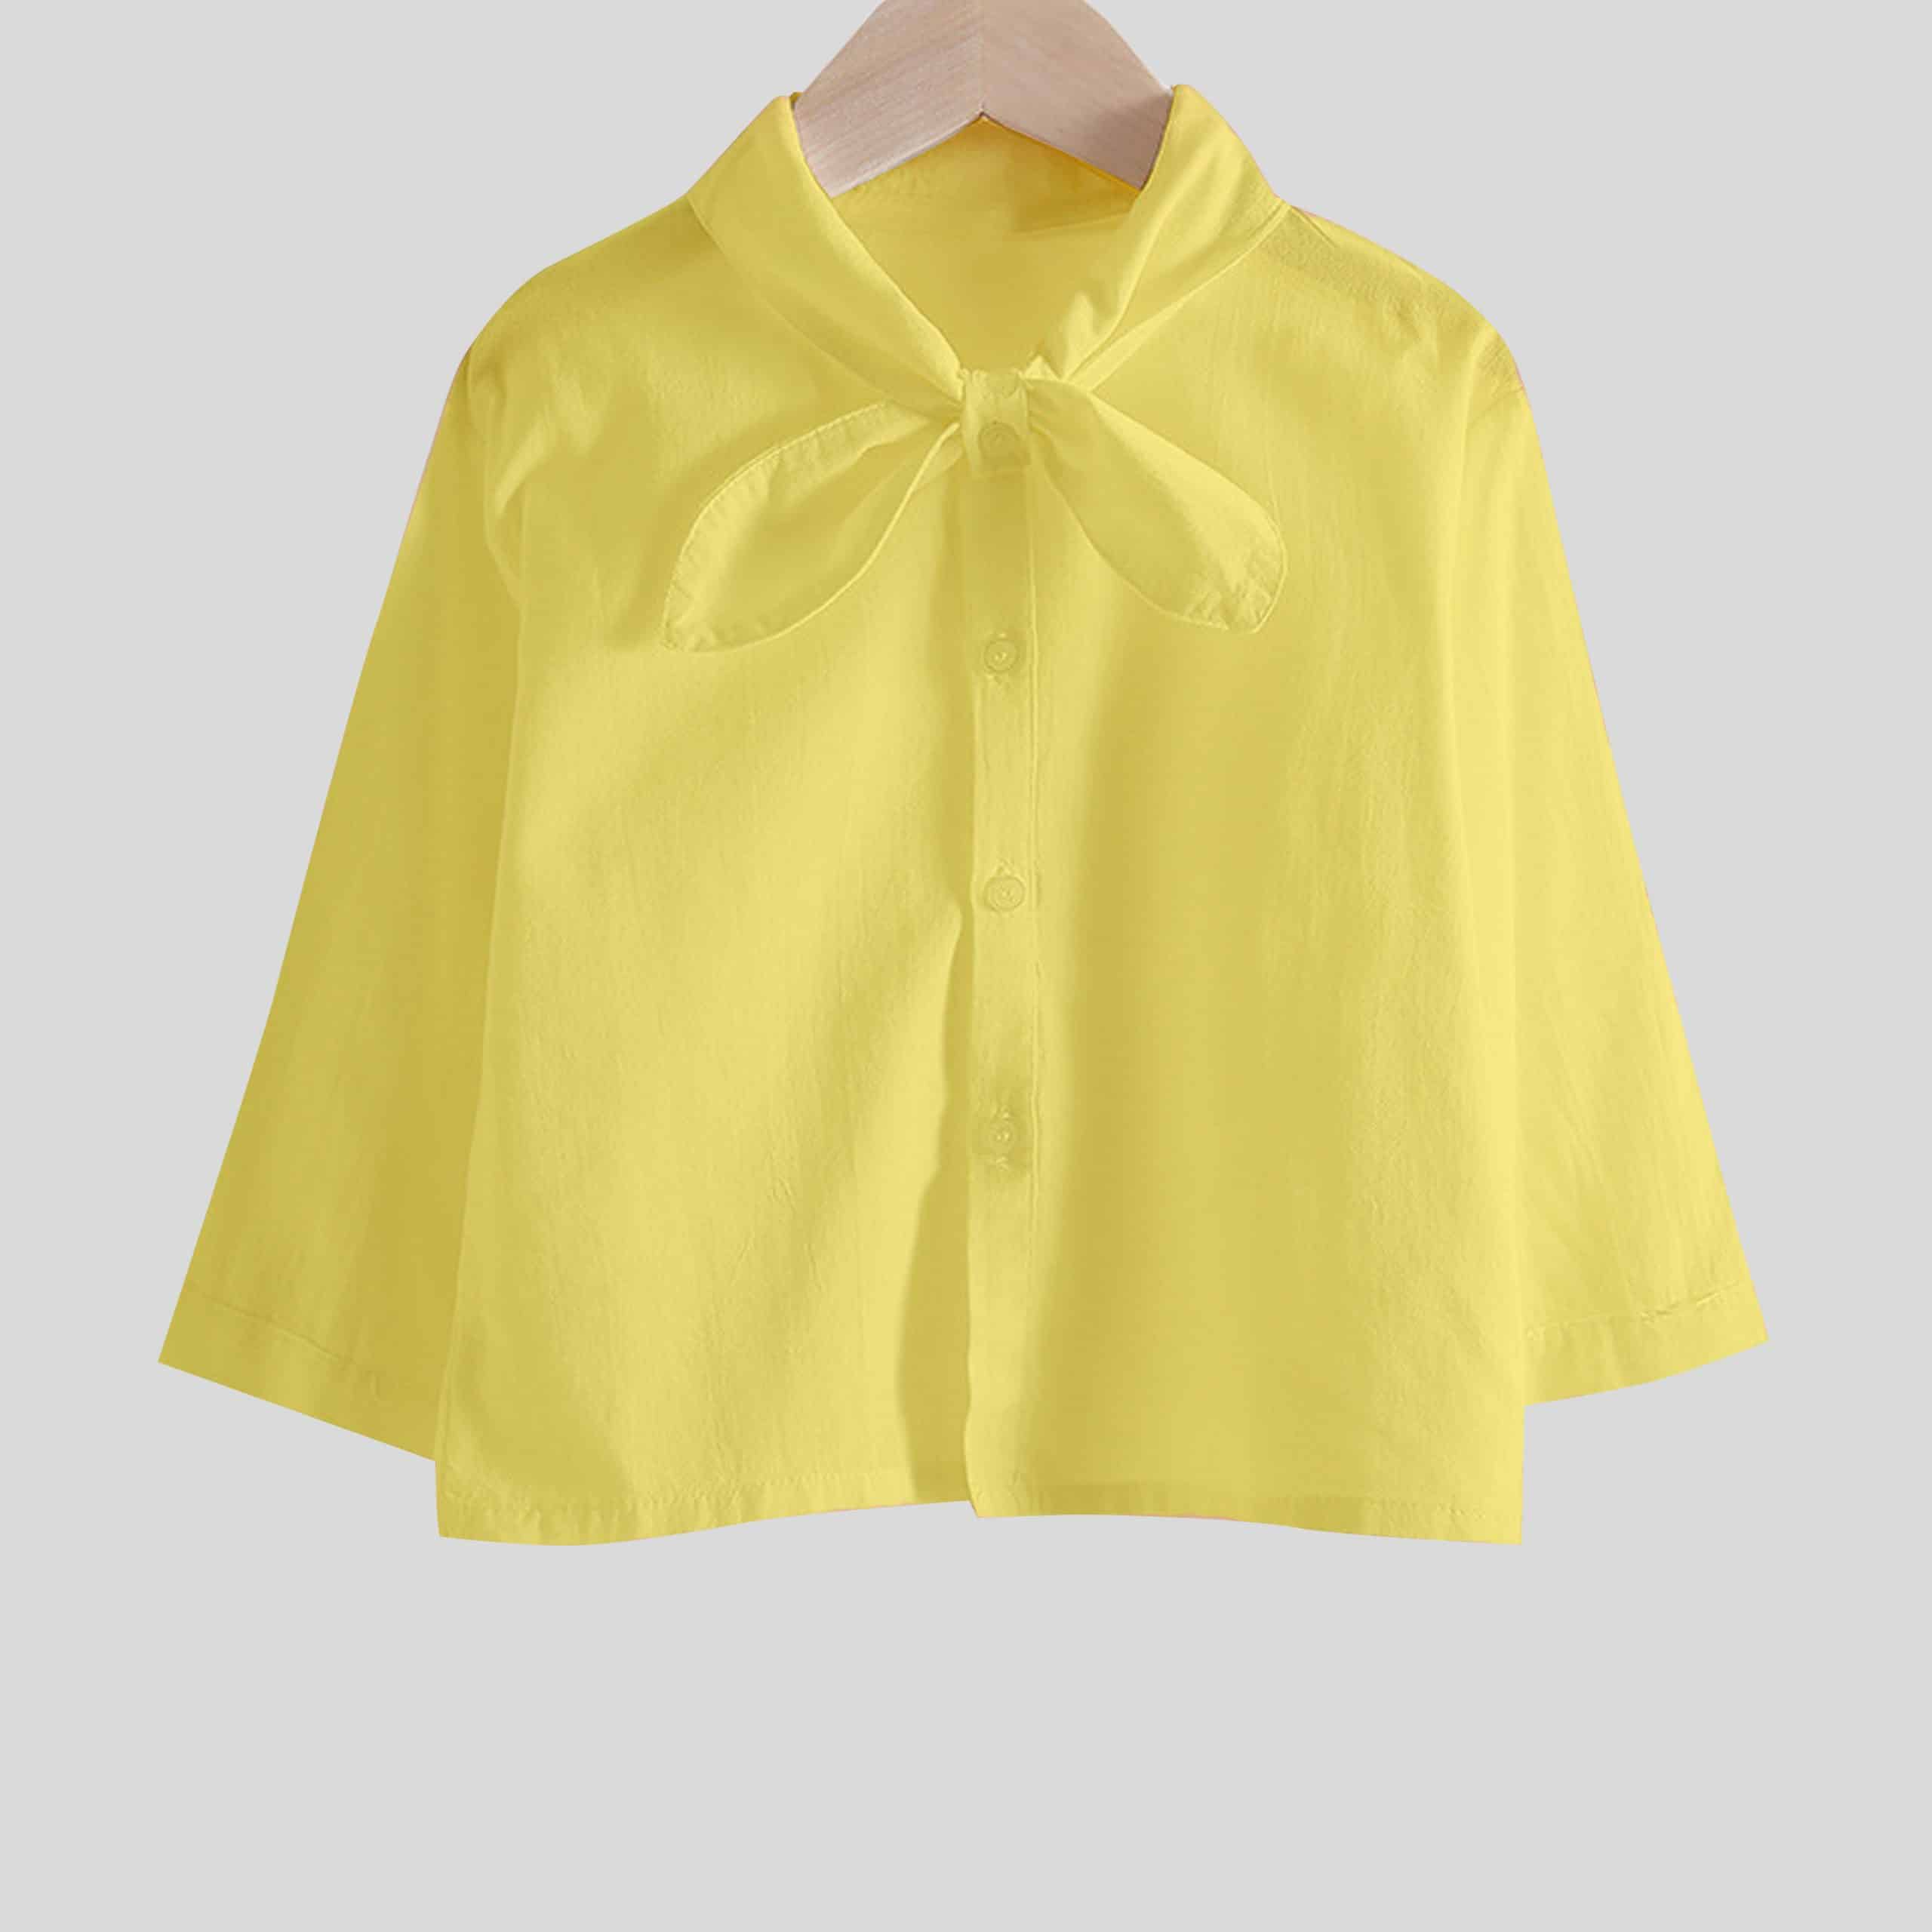 Girls yellow Shirt top with a cute tie knot - RKFCW296